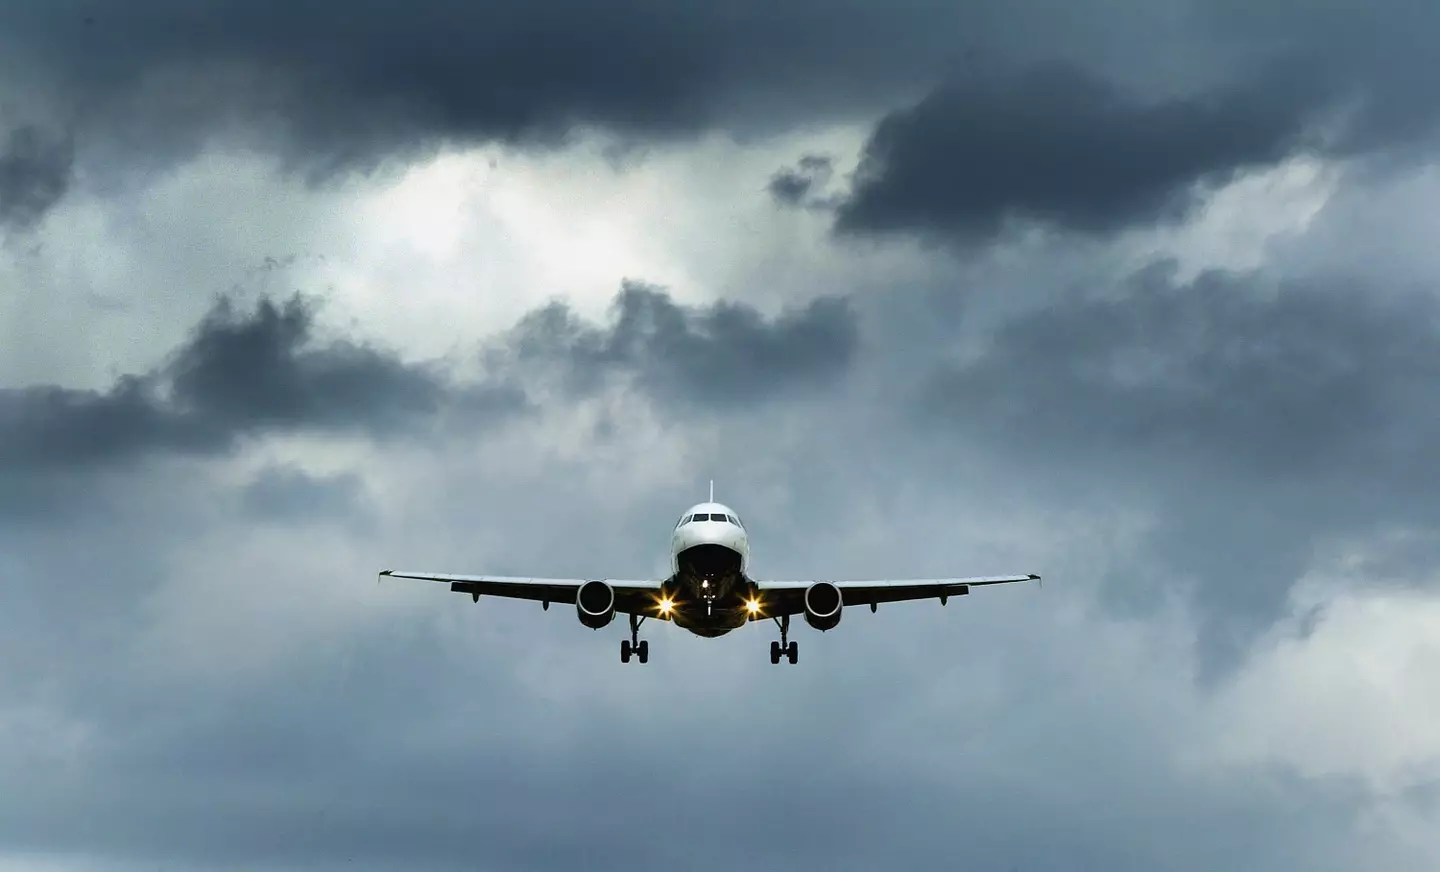 The FAA has given tips on how to avoid injuries from unexpected turbulence.